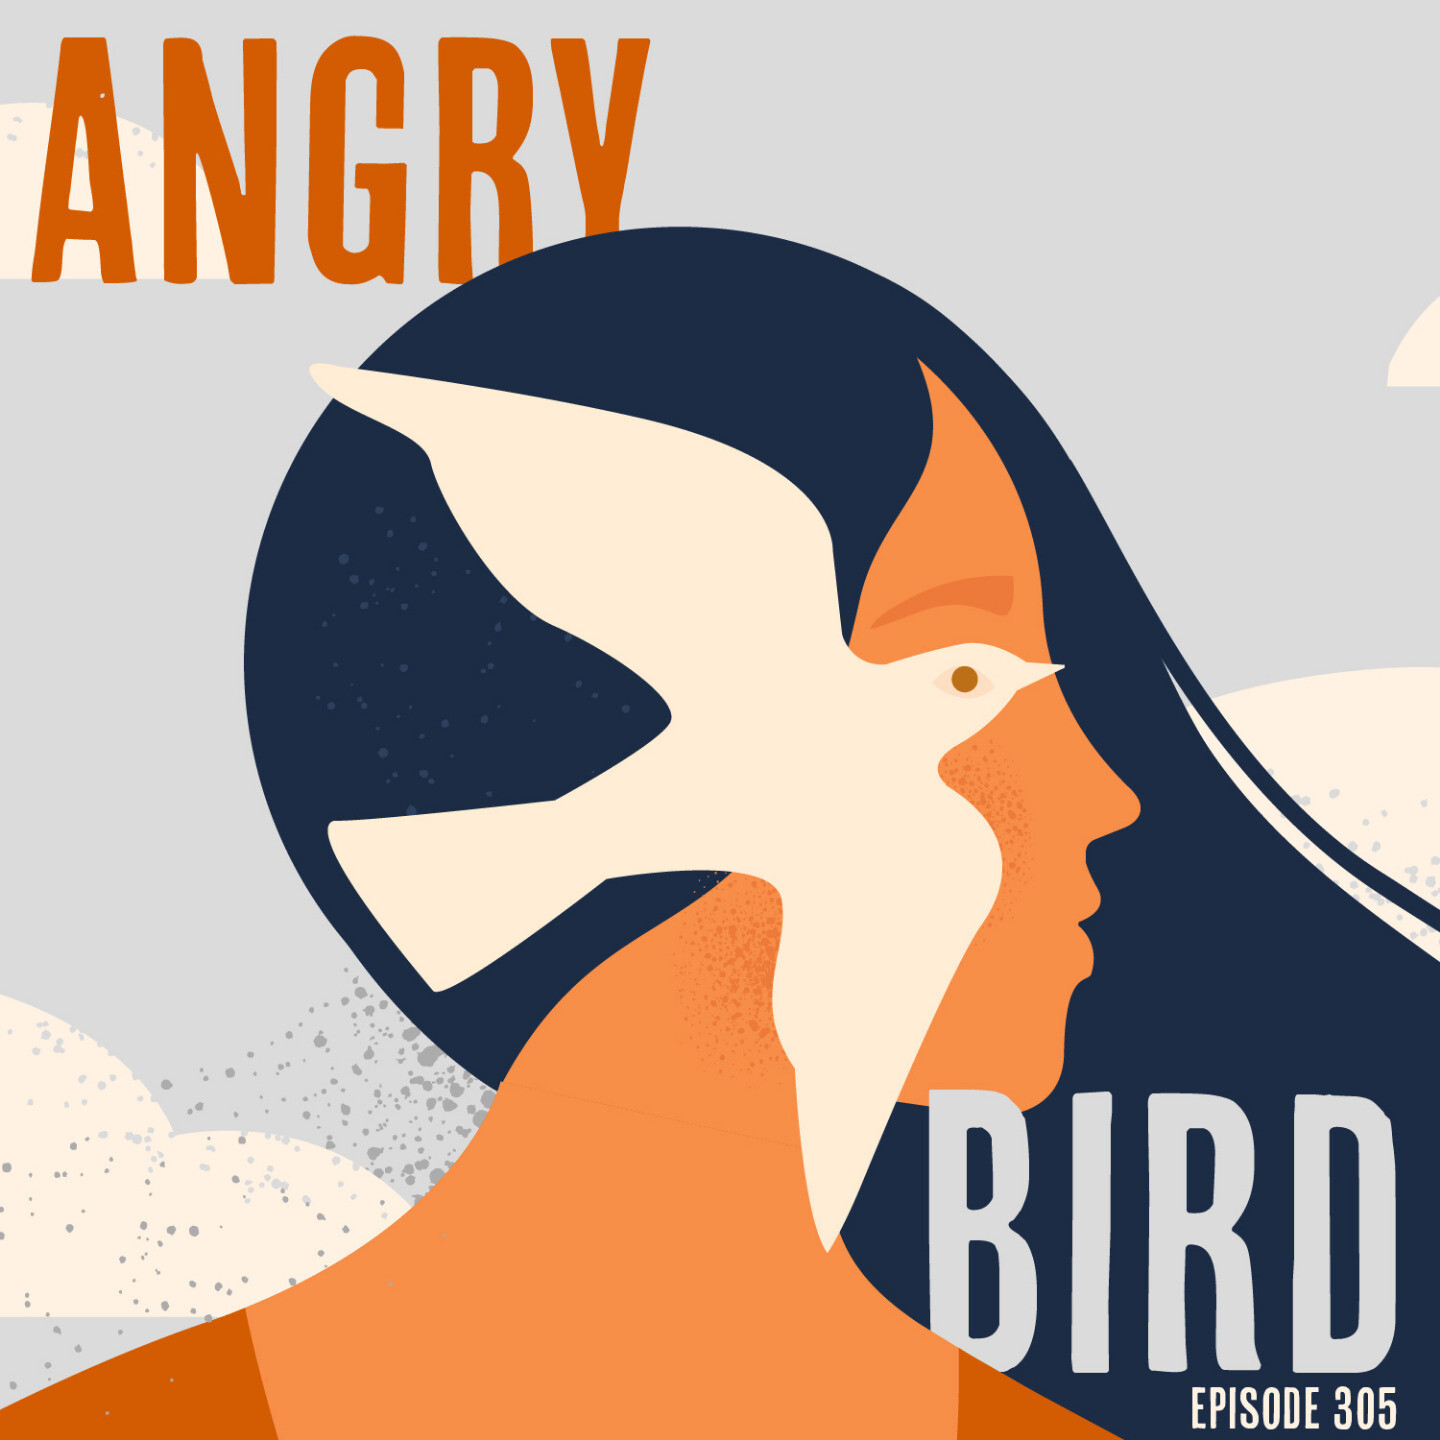 The text "Angry Bird" with a woman in the center with long black hair. A bird is partially over her face, and they share the same eye. "Episode 305" is in the bottom corner.